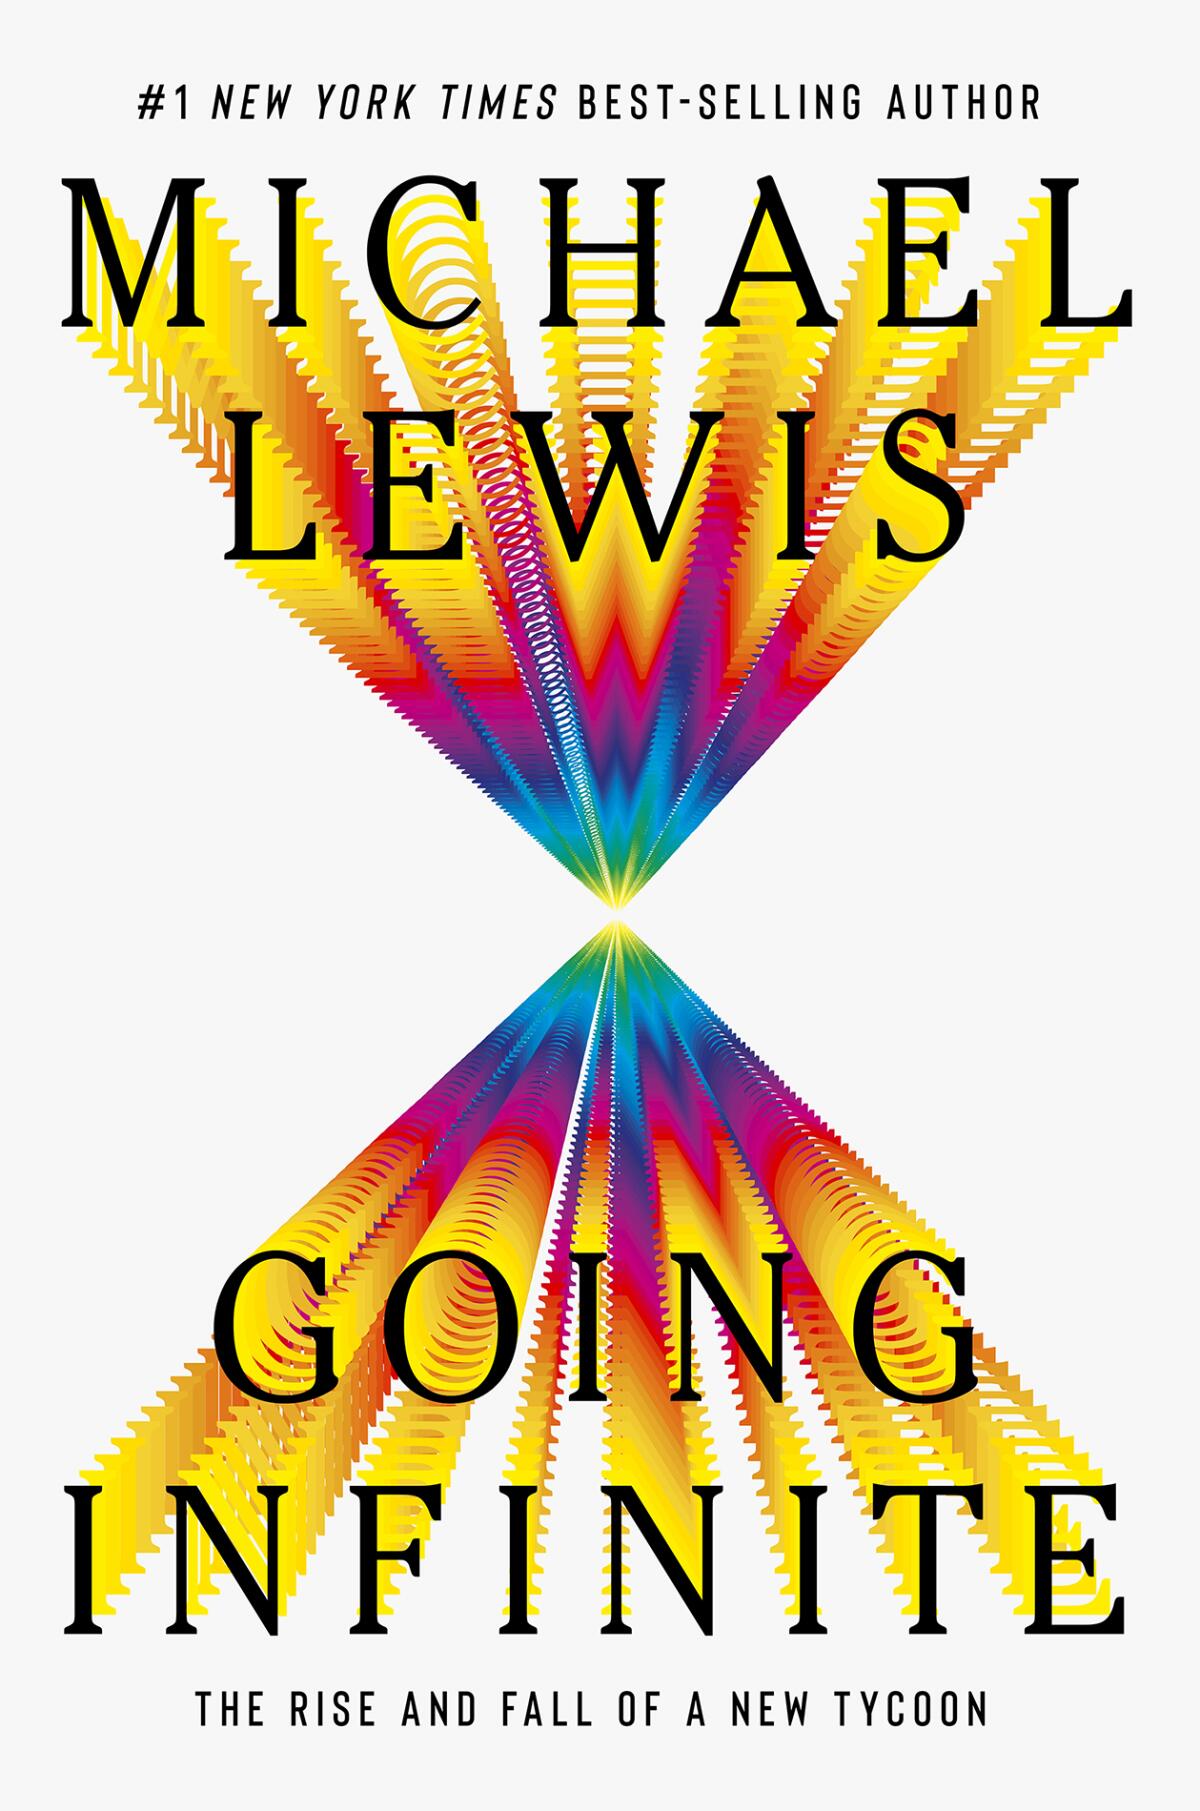 "Going Infinite," by Michael Lewis